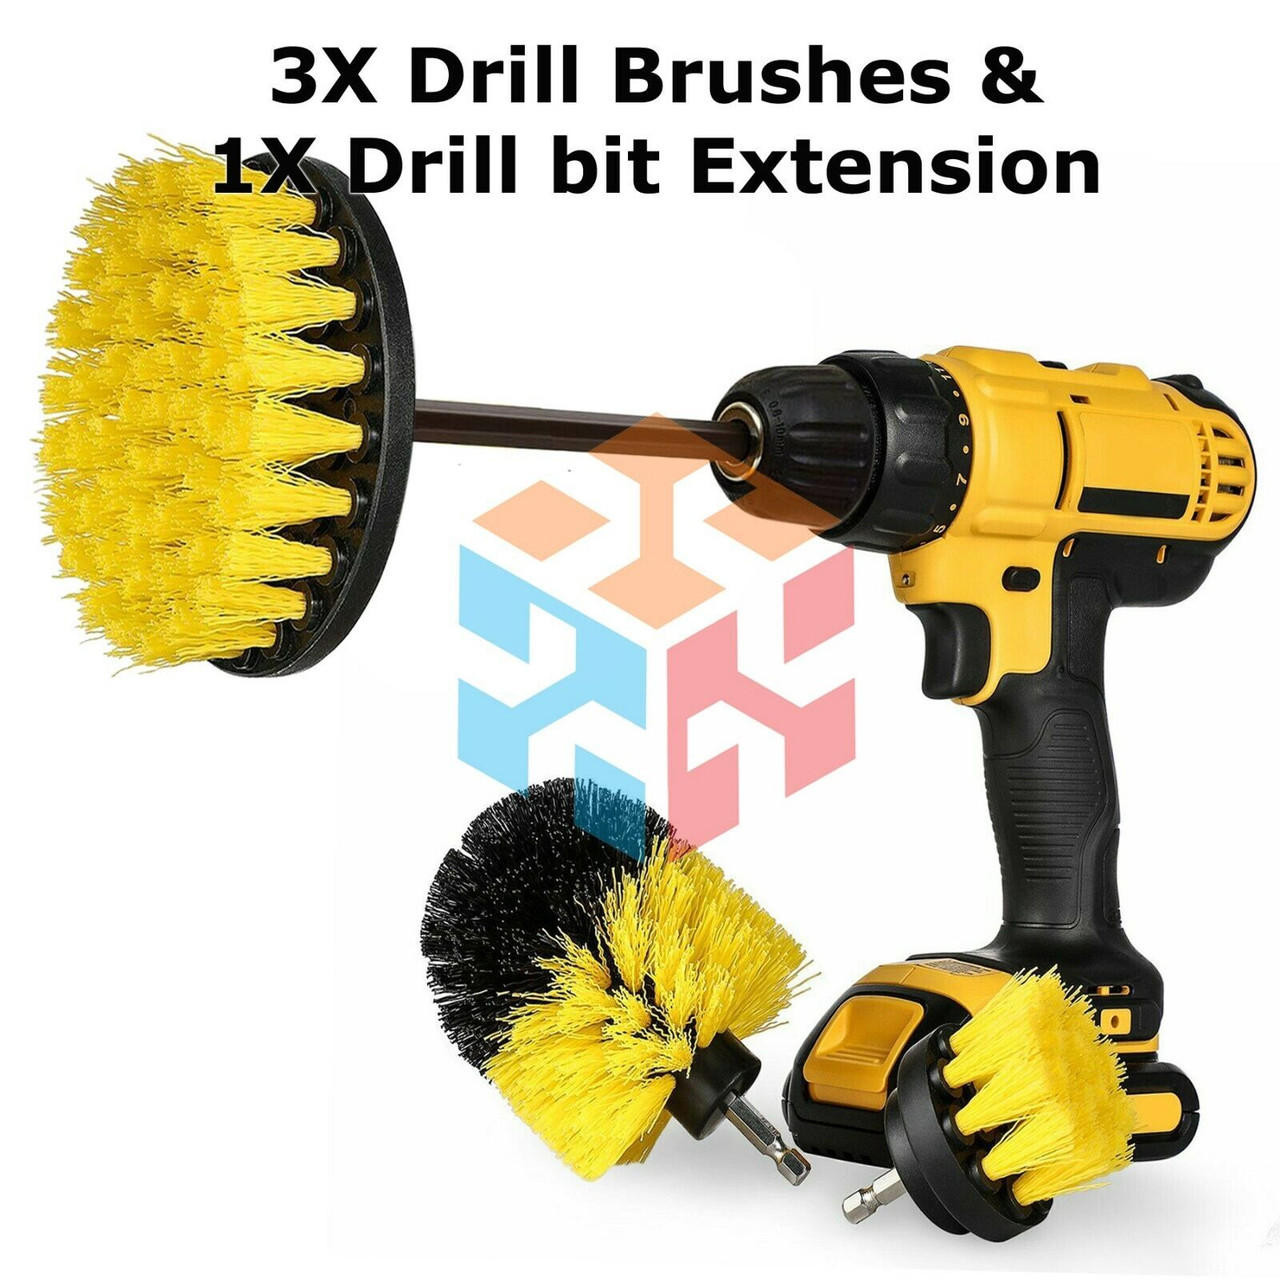 https://cdn11.bigcommerce.com/s-zrh8tkpr8d/images/stencil/1280x1280/products/10034/31483/drill-brushes-set-4pcs-tile-grout-power-scrubber-cleaner-spin-tub-shower-wall__95961.1665654842.jpg?c=2&imbypass=on